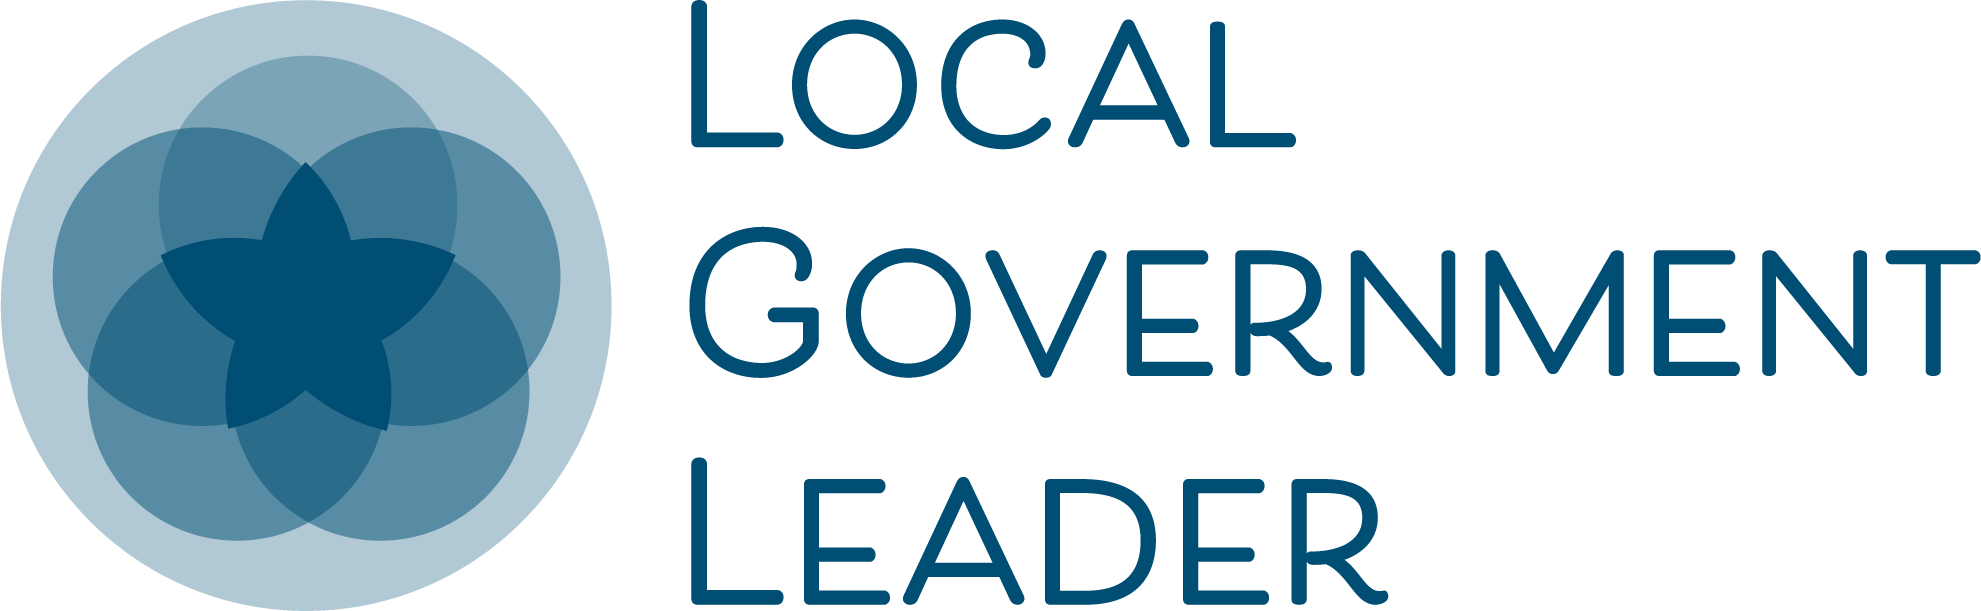 Local Government Leader